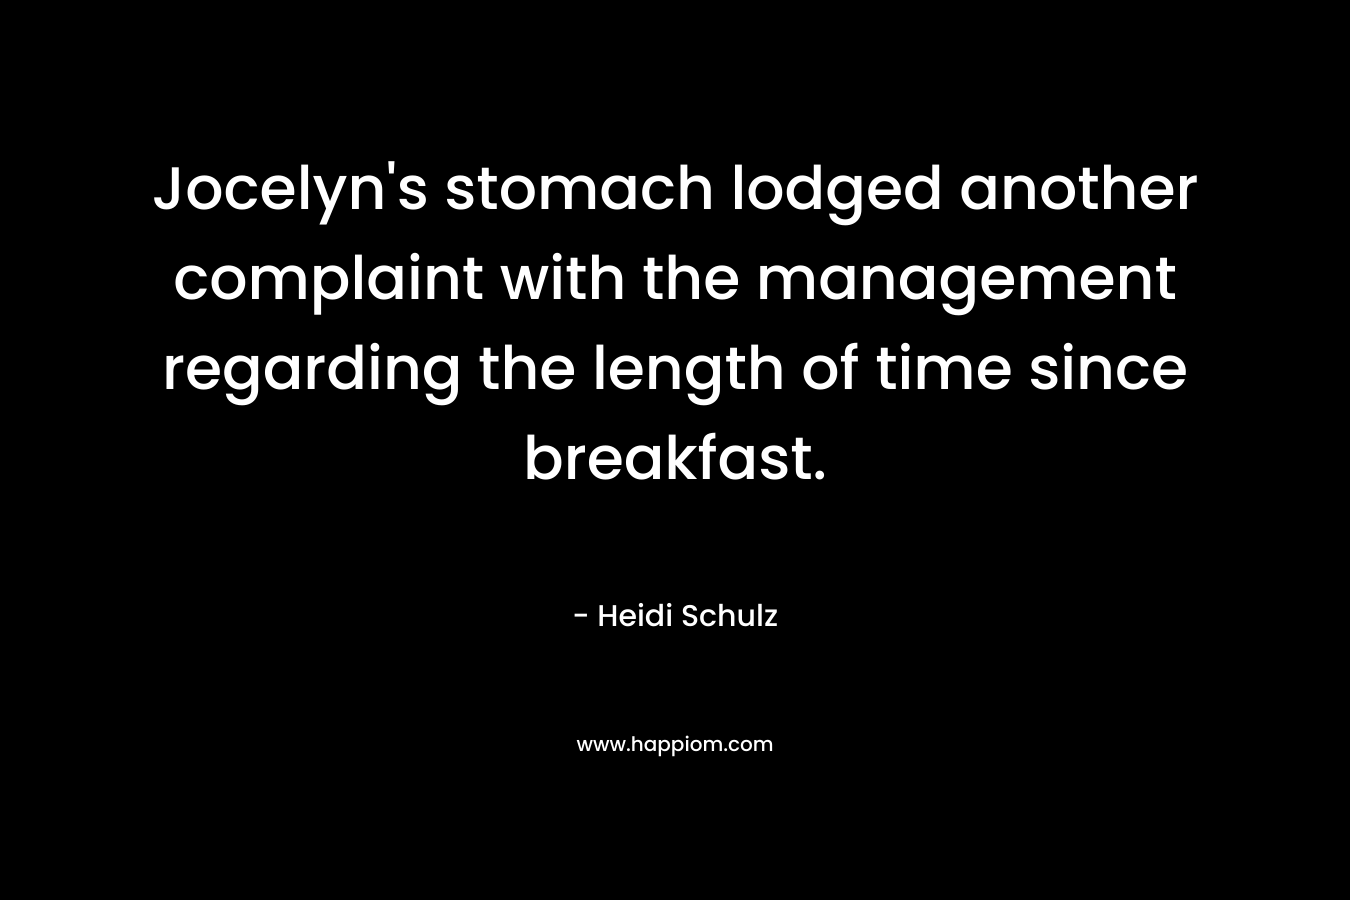 Jocelyn’s stomach lodged another complaint with the management regarding the length of time since breakfast. – Heidi Schulz